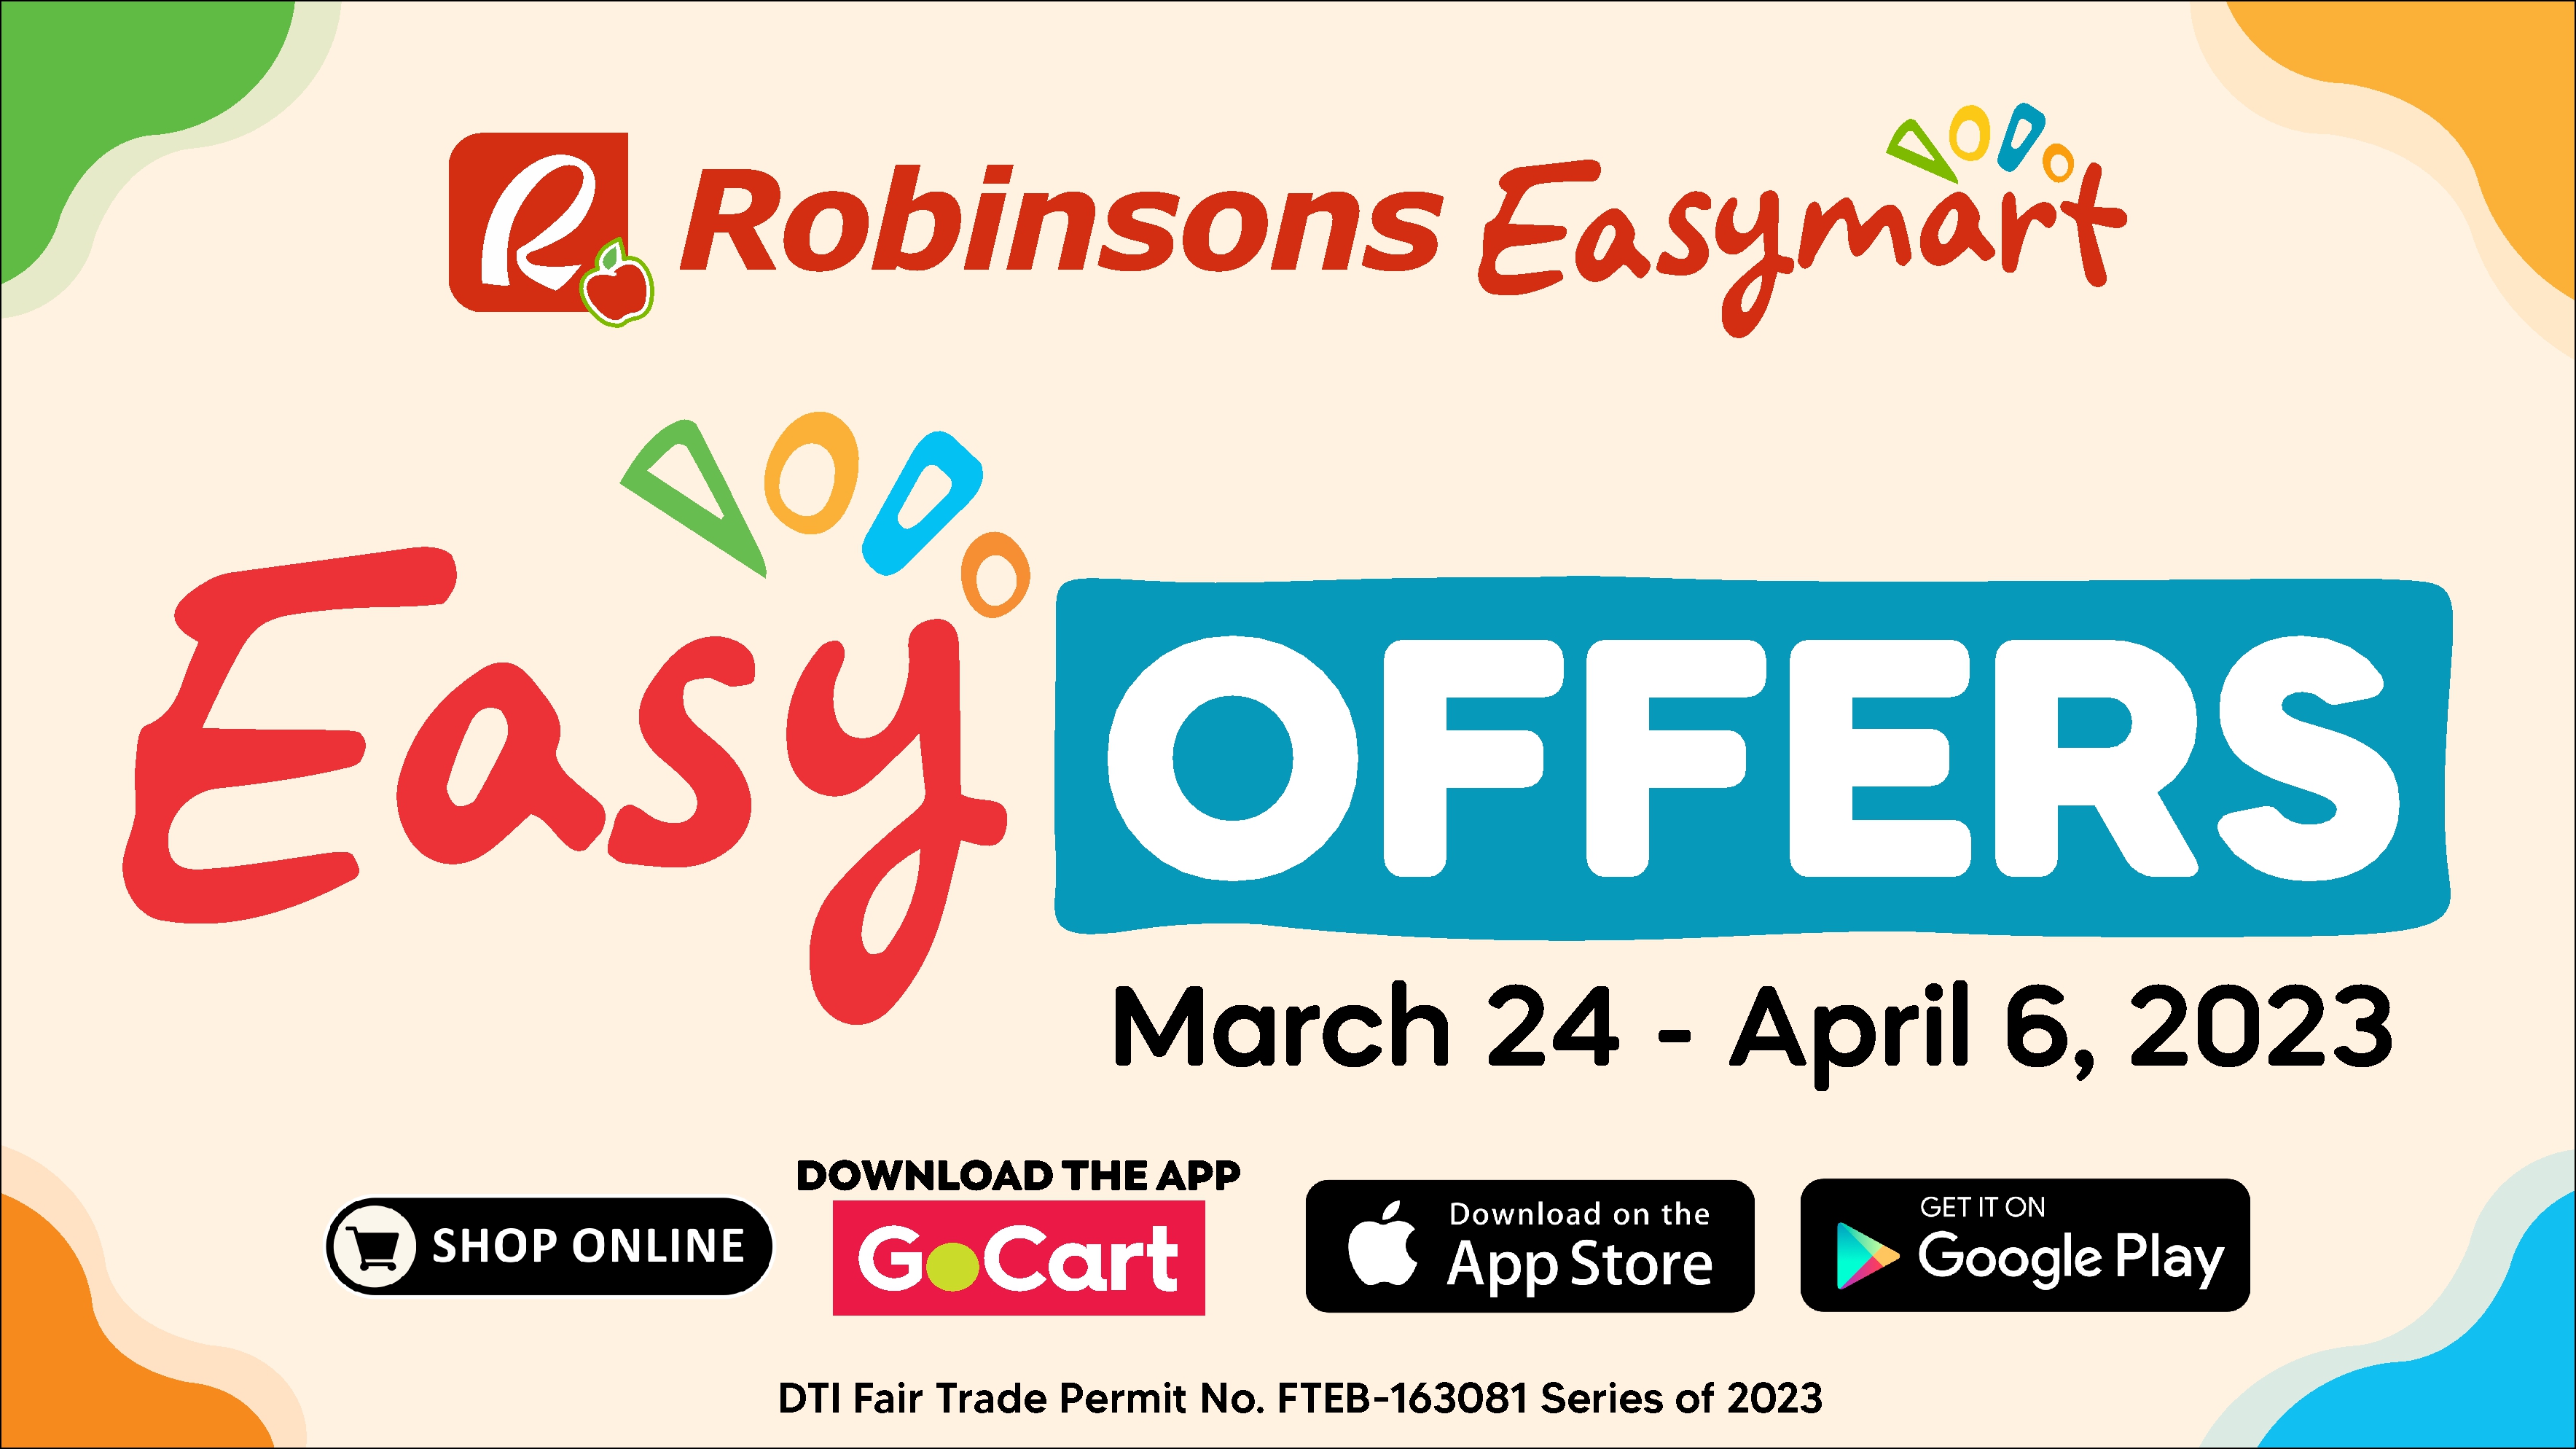 Easy Offers March 24 - April 6, 2023